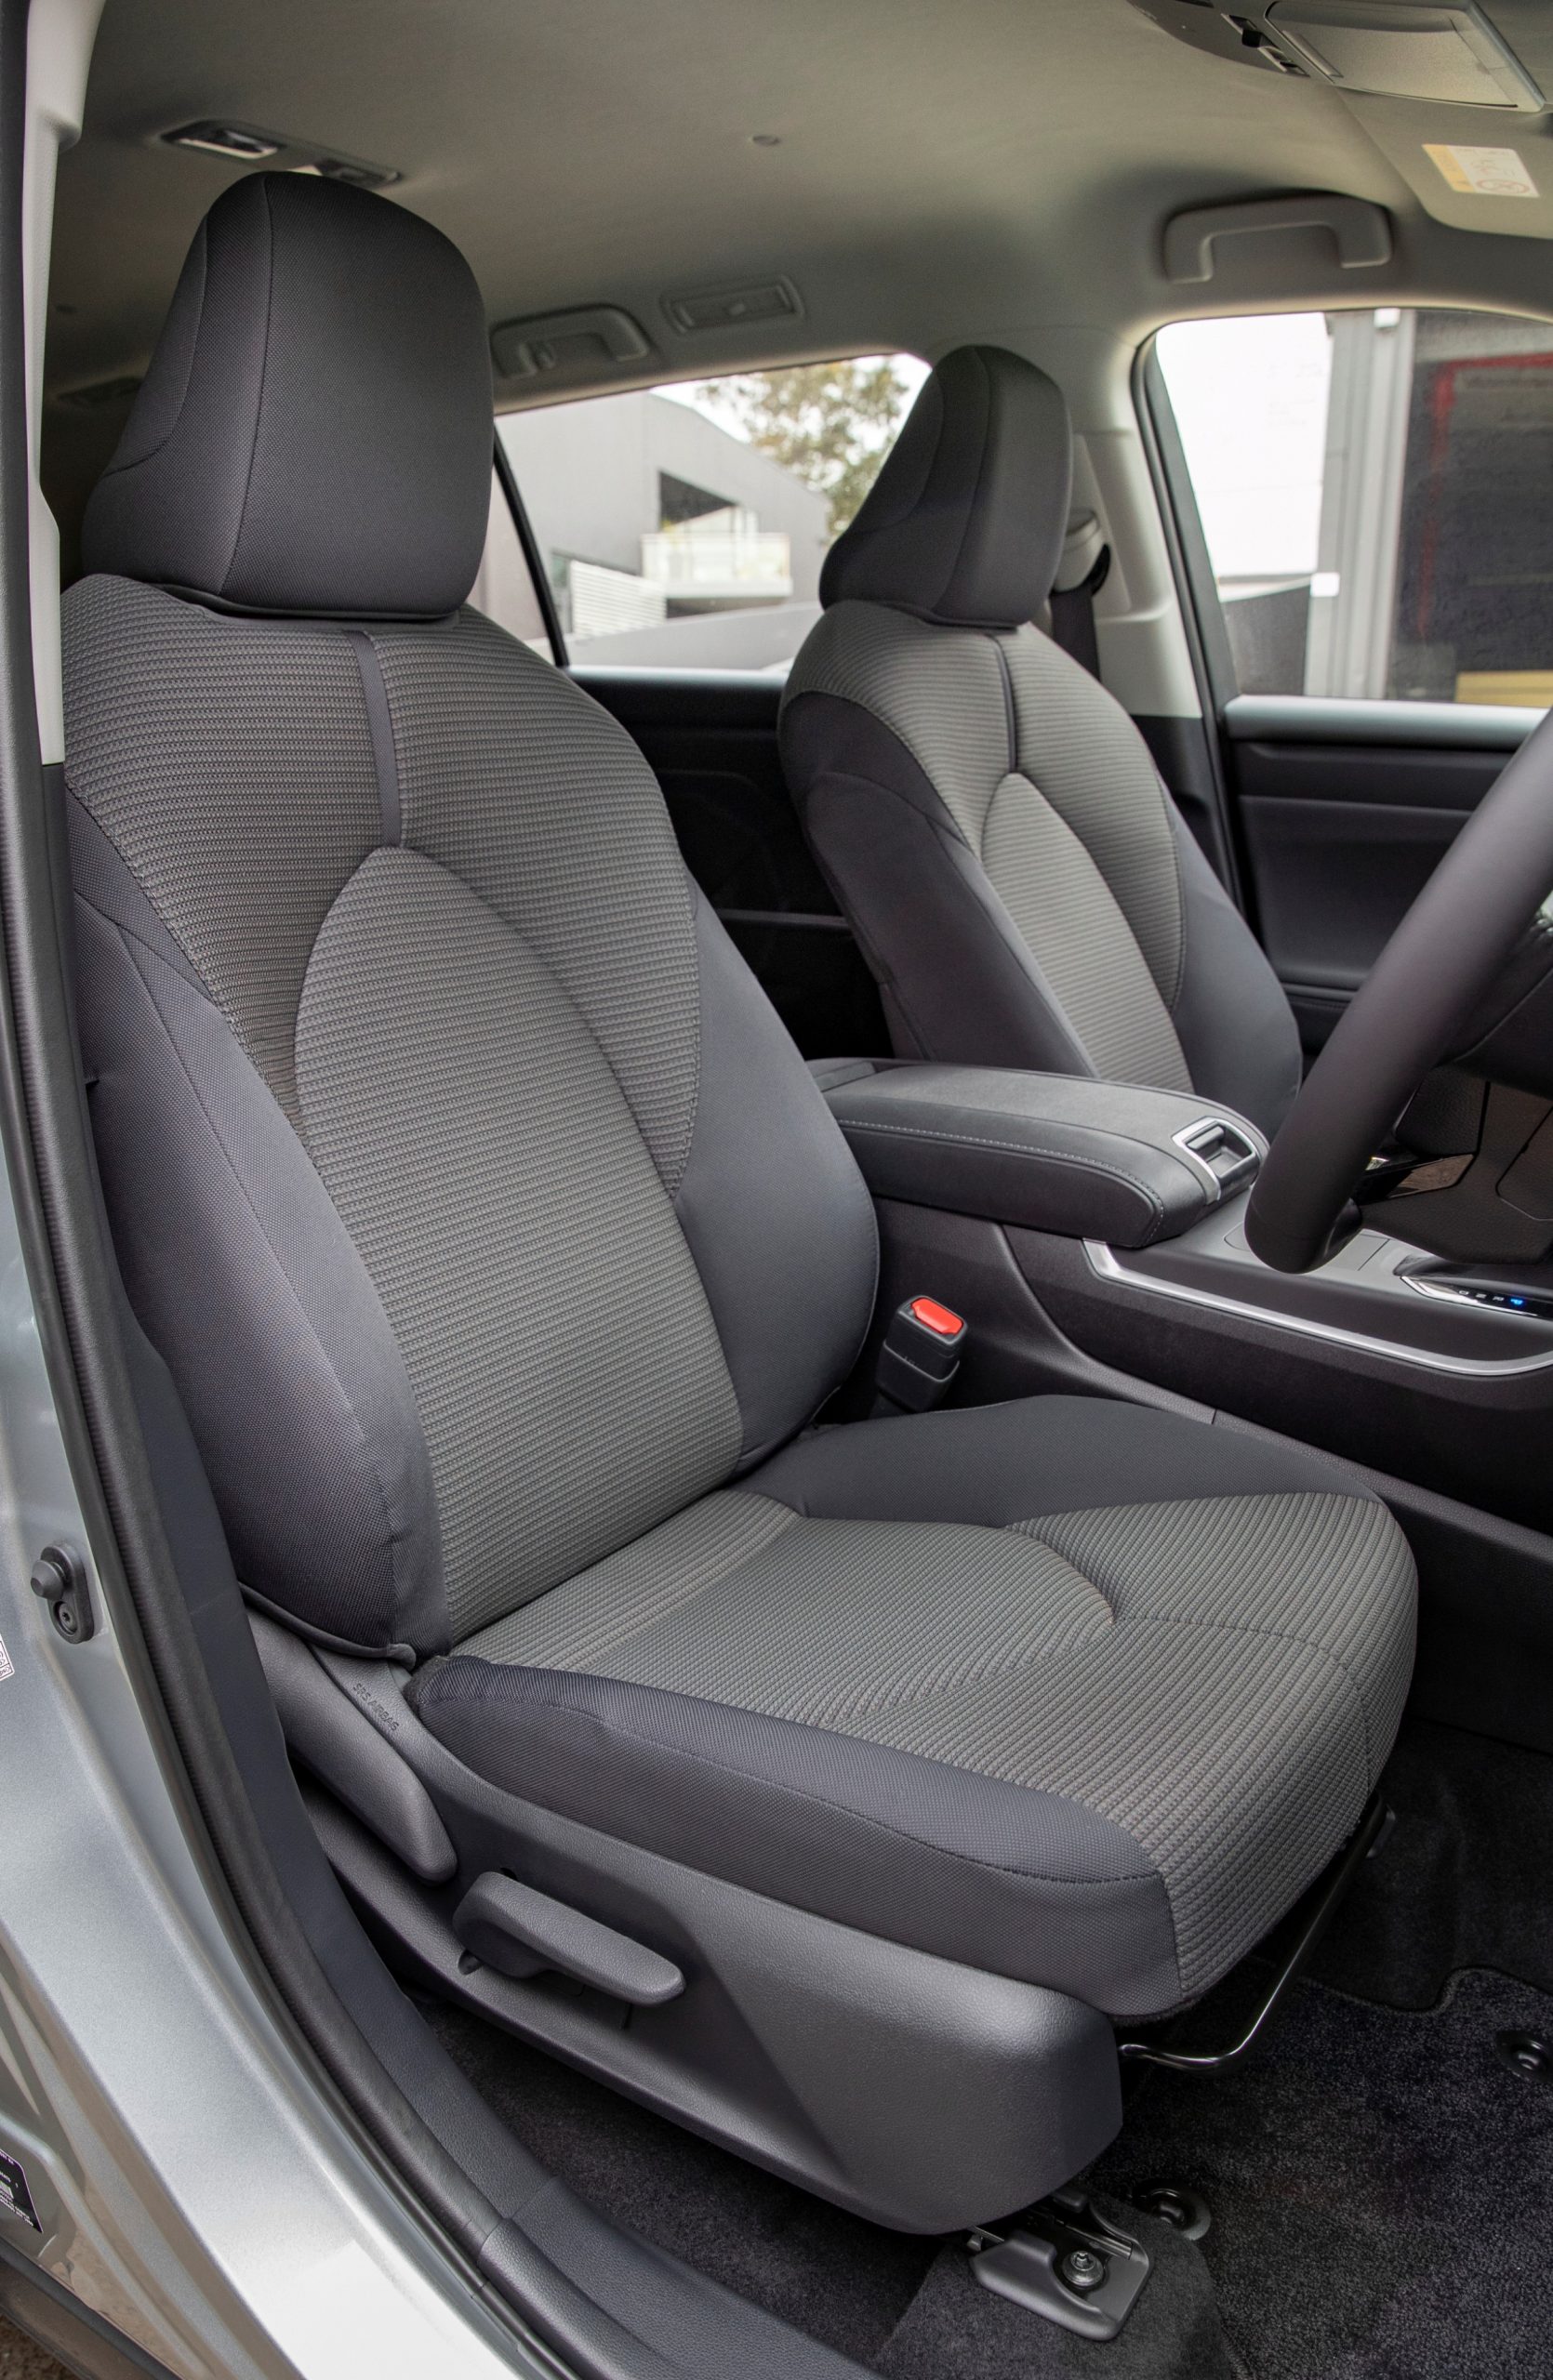 2021 Toyota Kluger GX front seats